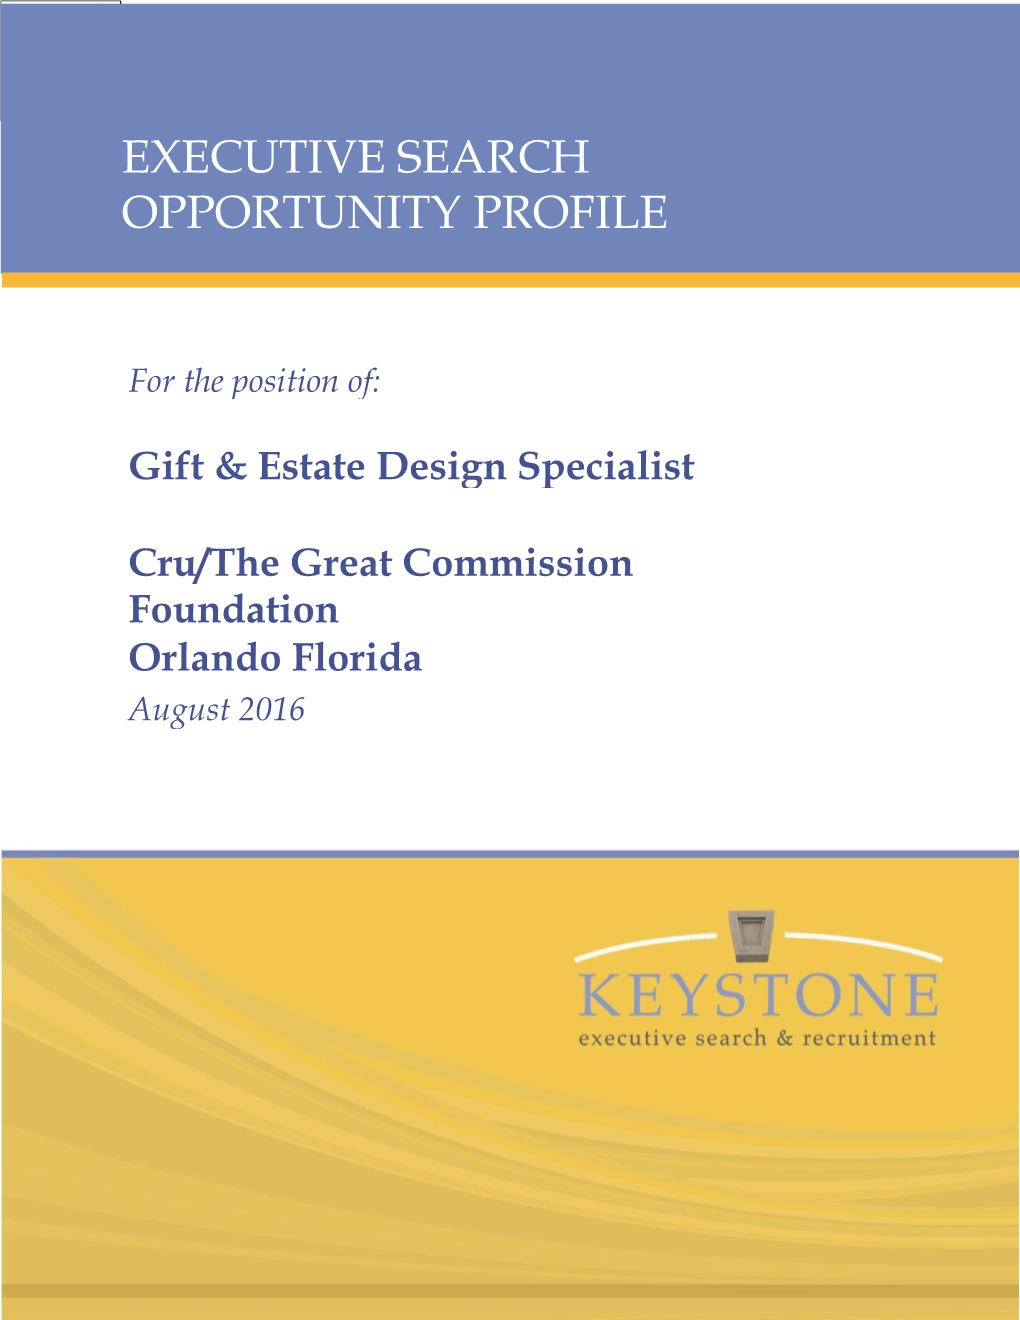 Executive Search Opportunity Profile